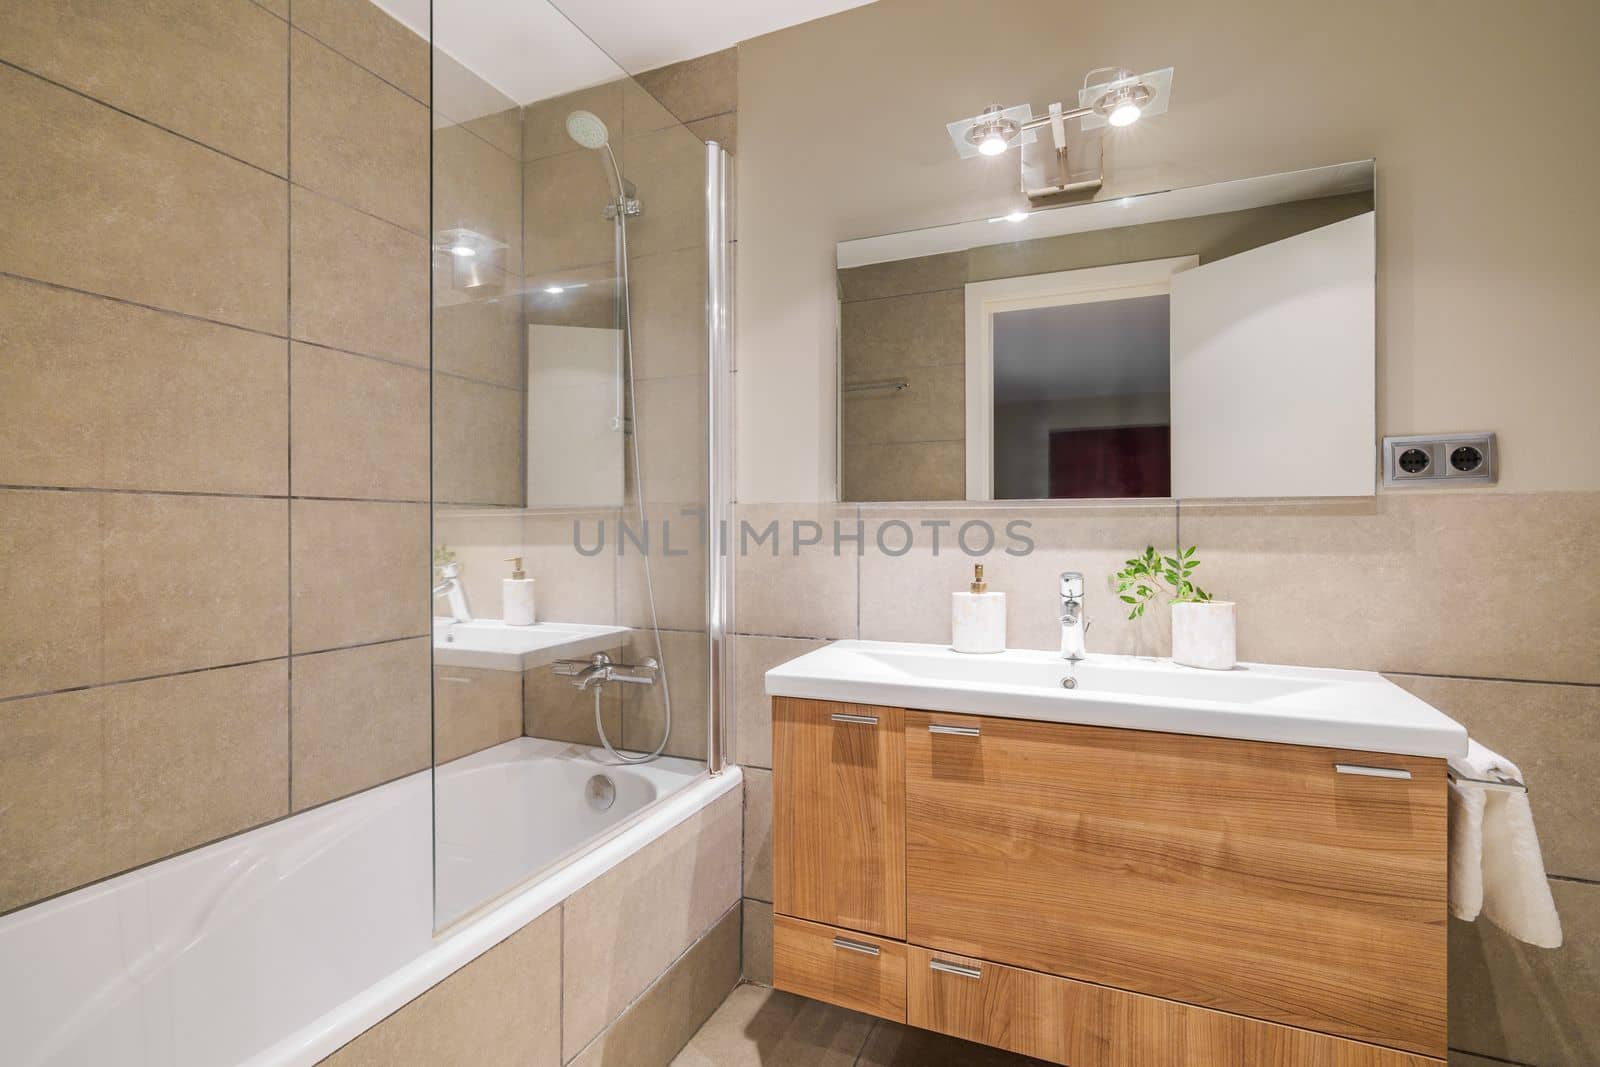 Bathroom in beautiful beige color. Vanity top sink with wooden drawers. Bathtub is fenced with protective glass from splashes. Front door is reflected in square large mirror opposite. by apavlin